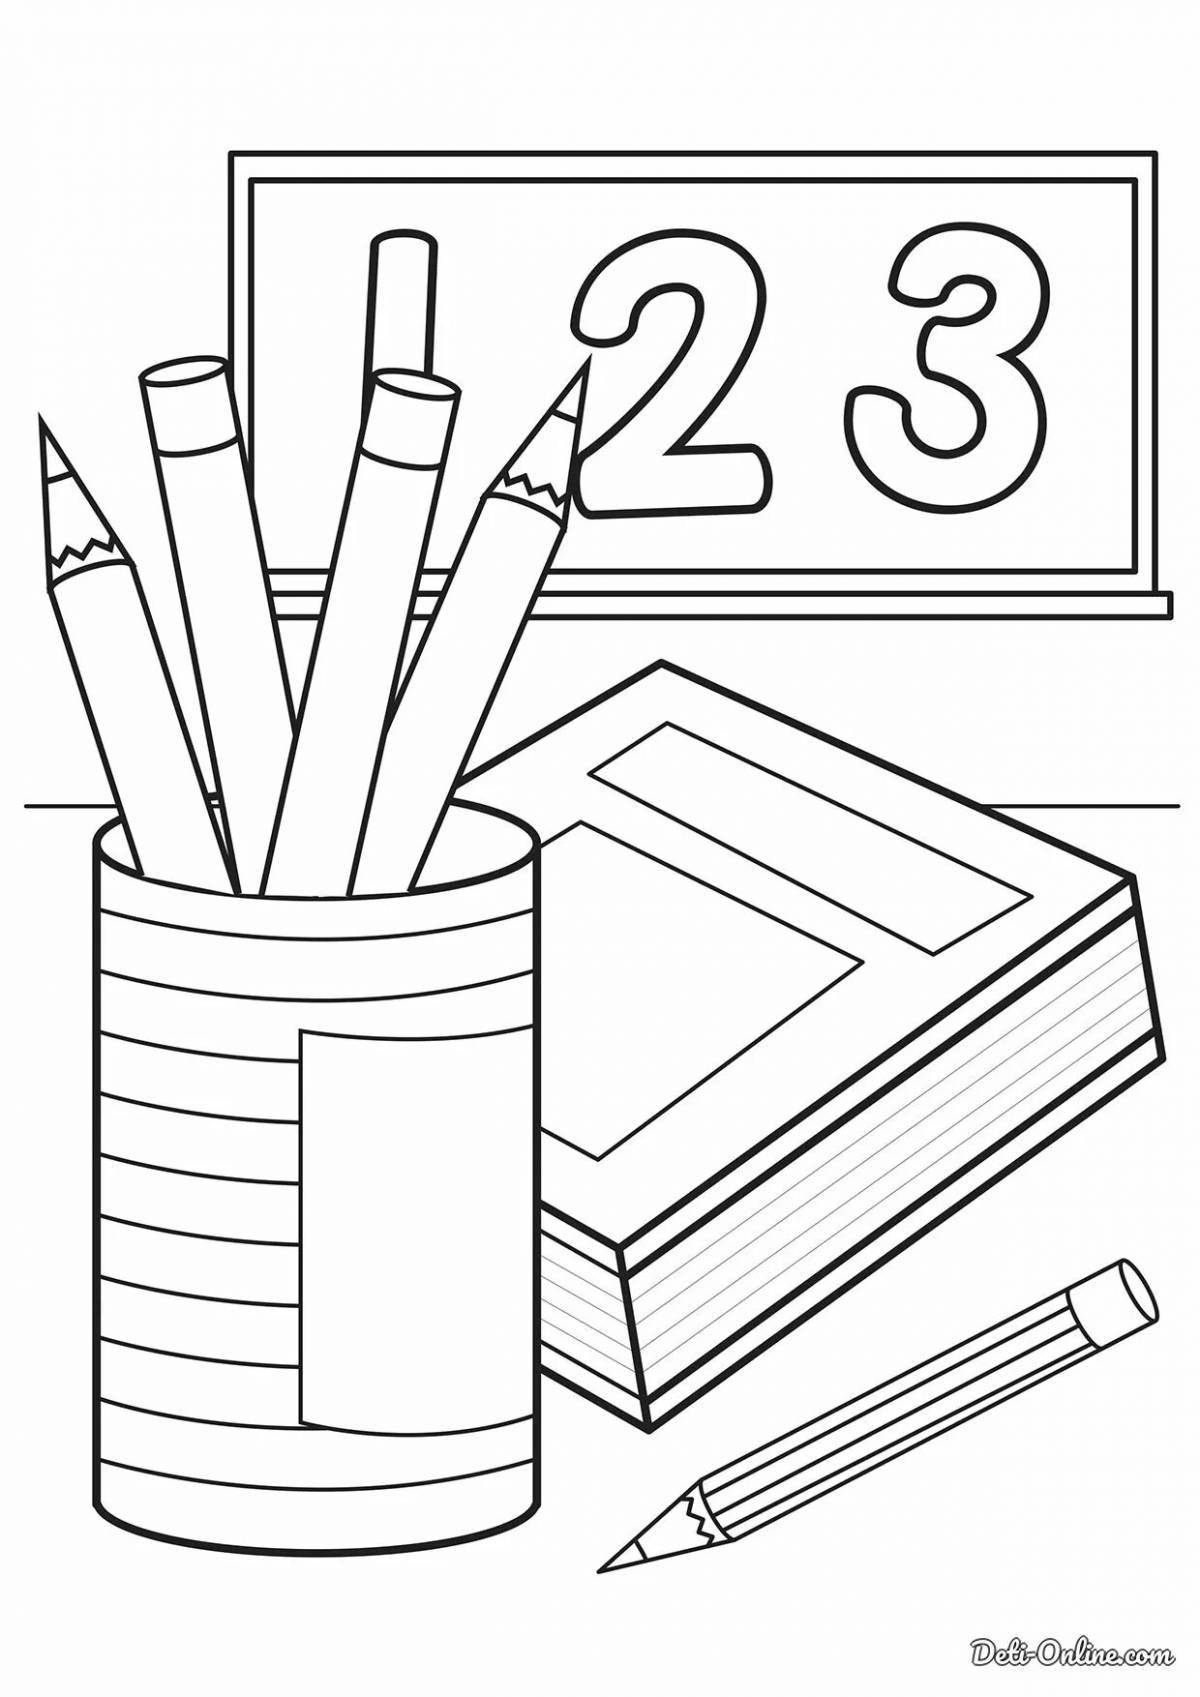 Brightly colored September 1st coloring book